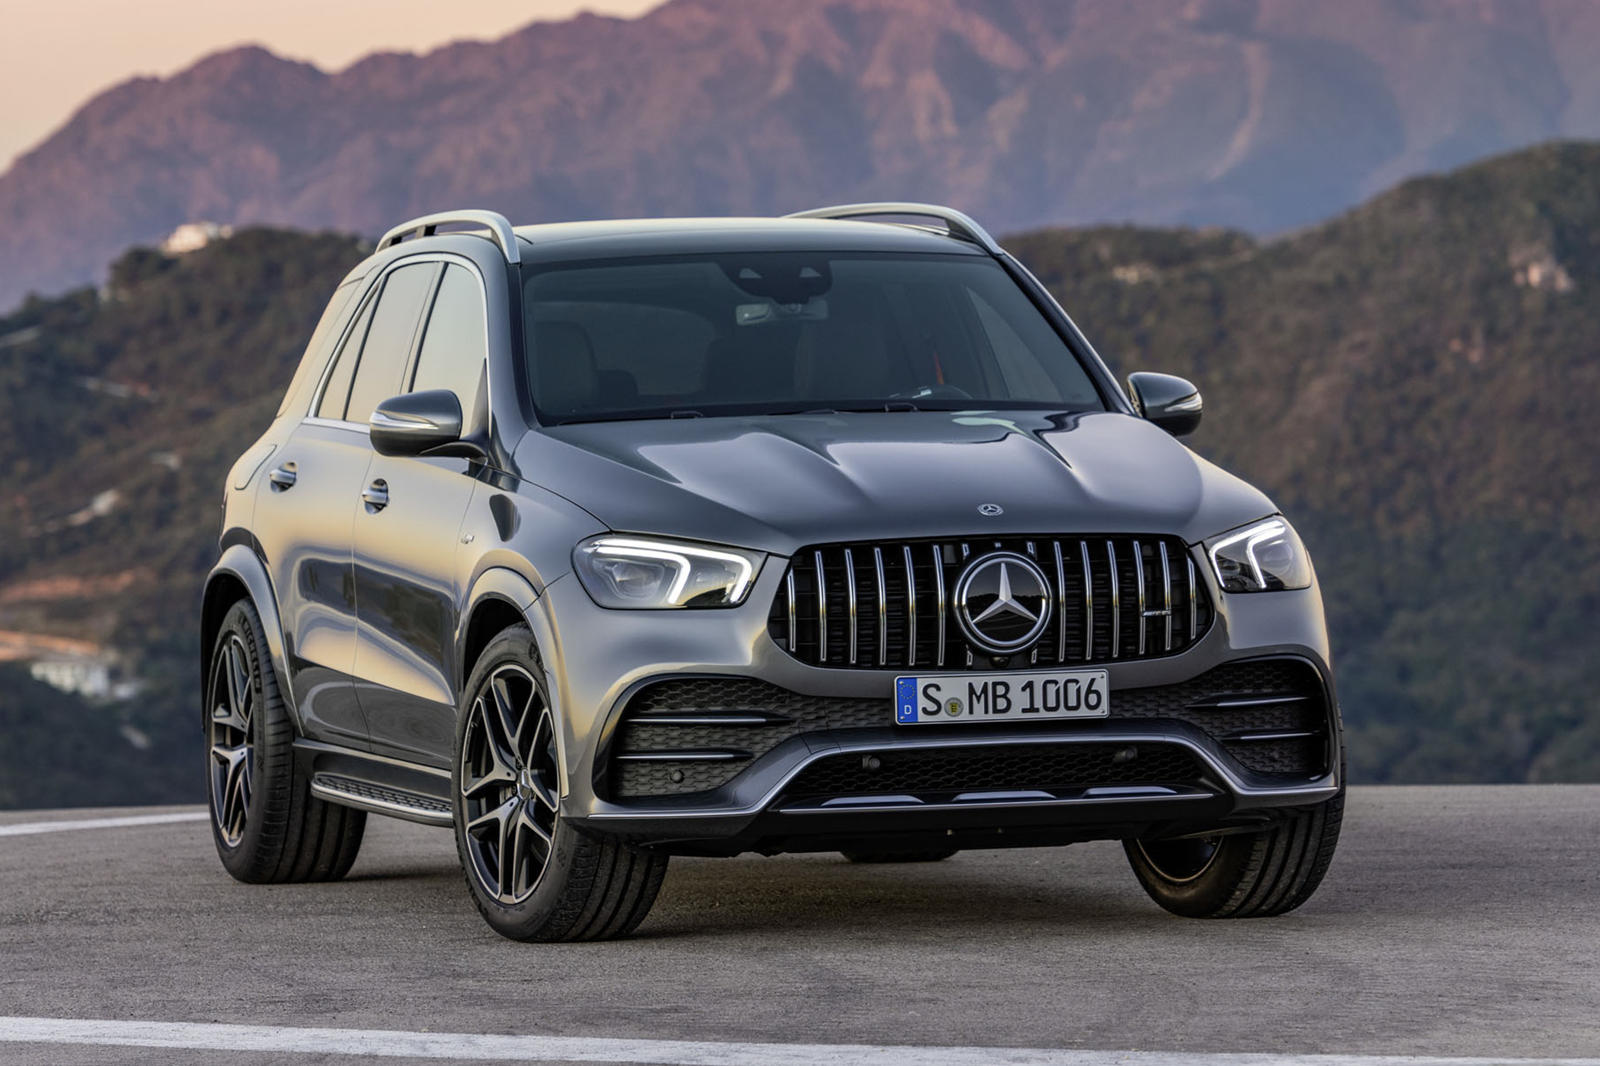 2022 MercedesAMG GLE 53 SUV Review, Pricing Mercedes AMG GLE 53 SUV